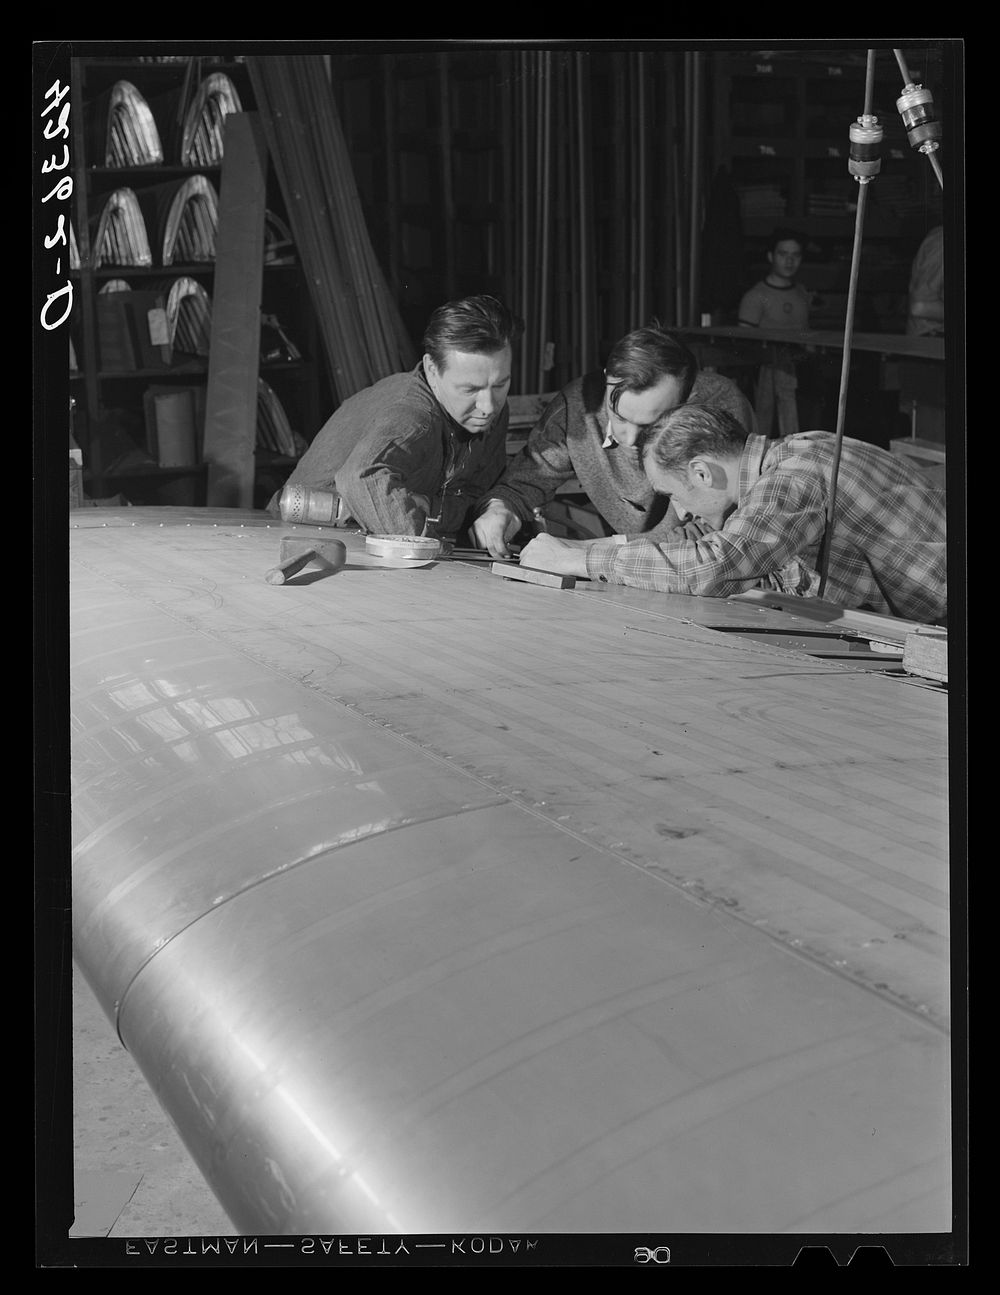 Working on an aileron assembly of a wing at the Vought Sikorsky Aircraft Corporation. Stratford, Connecticut. Sourced from…